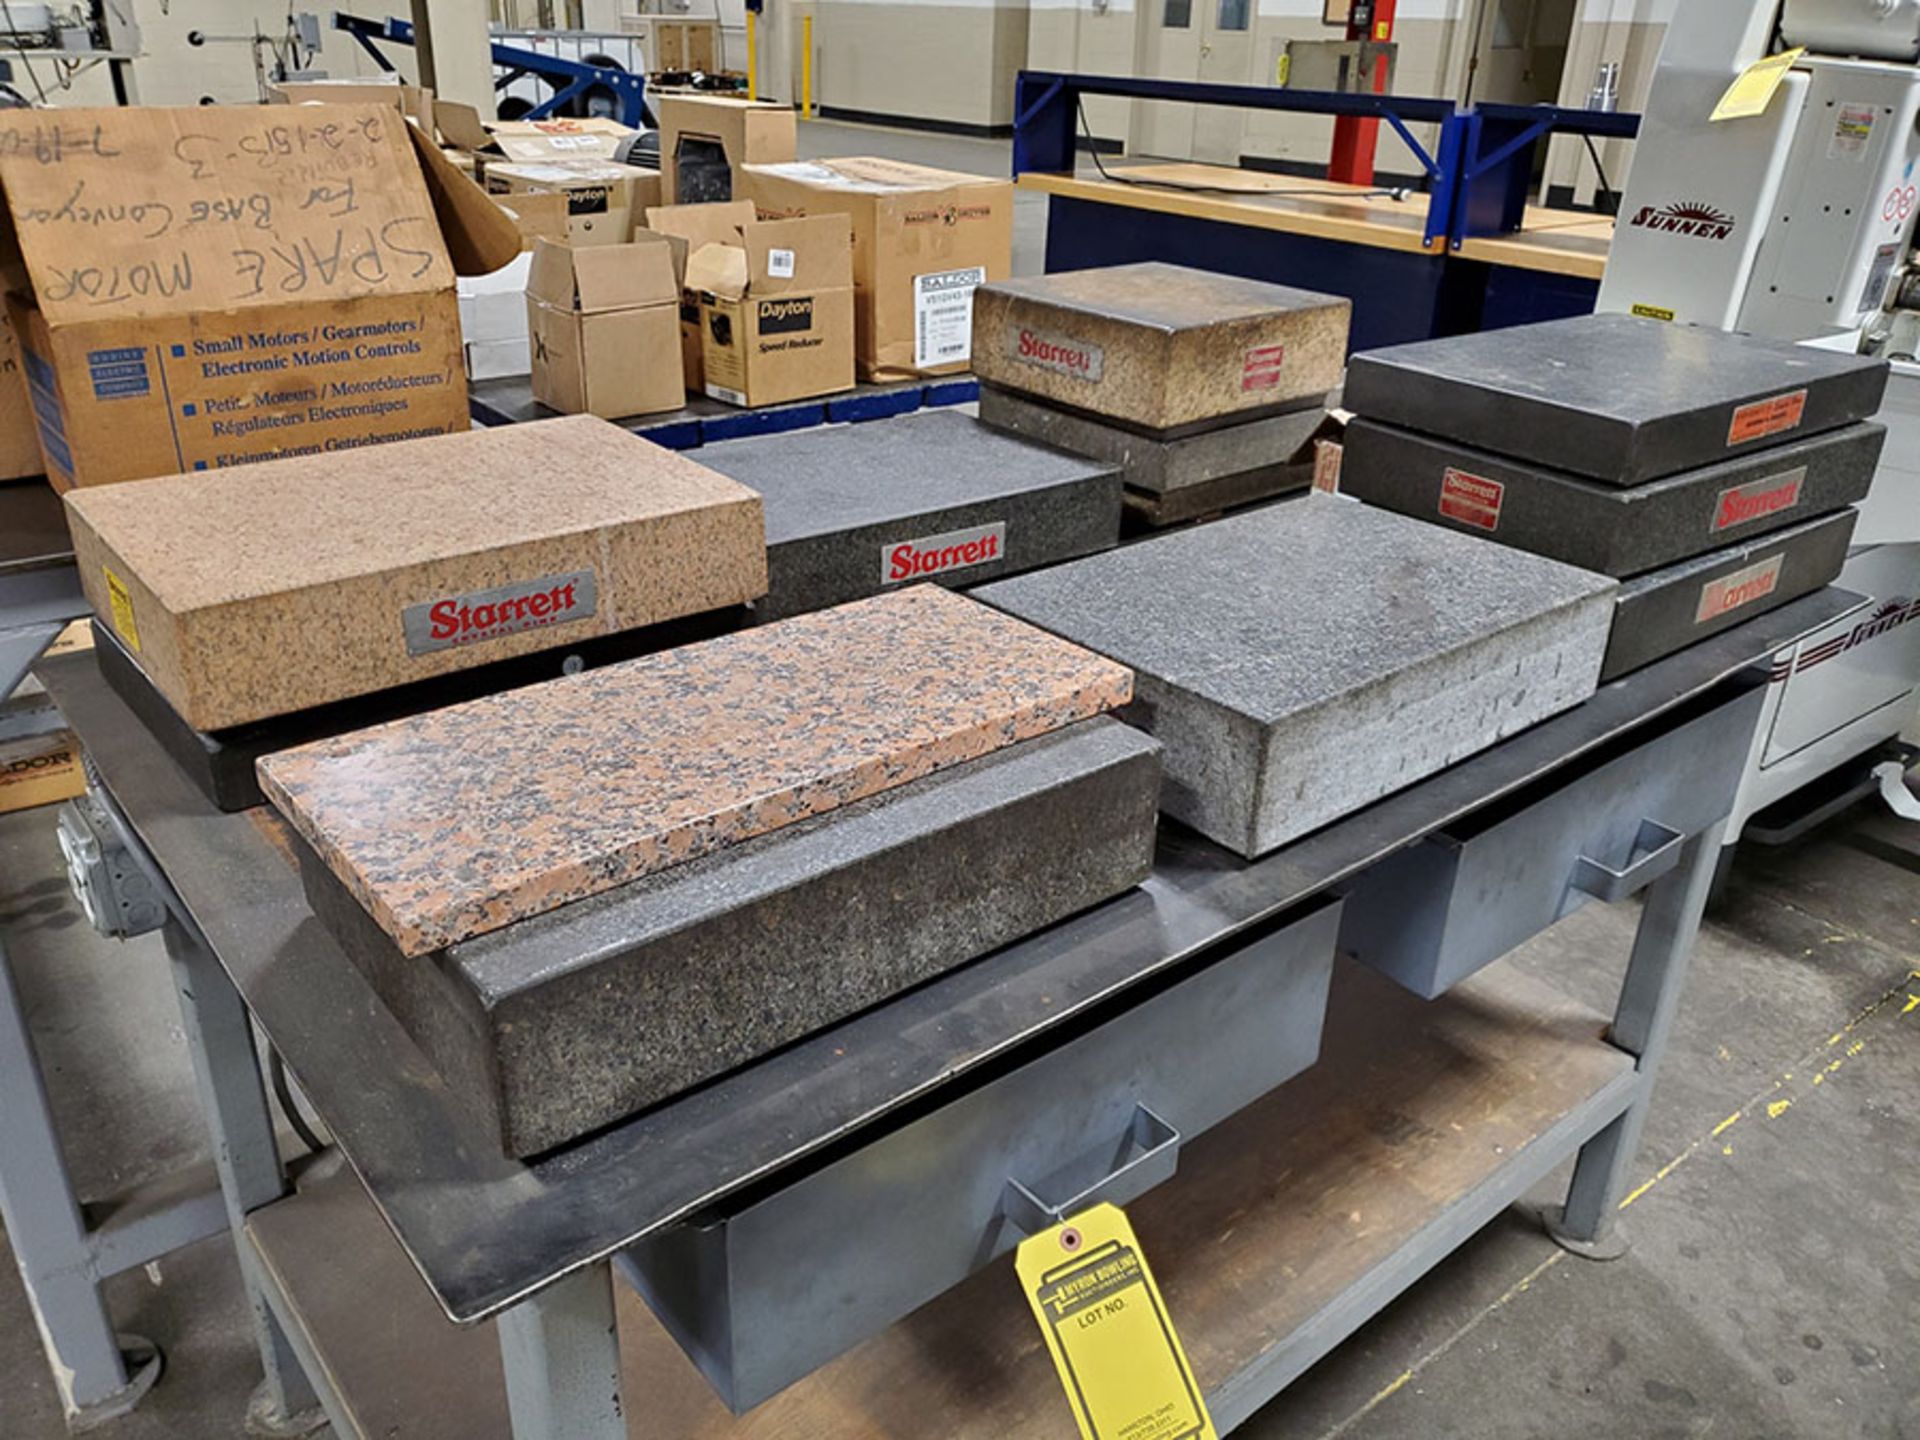 LOT OF ASSORTED GRANITE SURFACE PLATES ON STEEL WORKTABLE